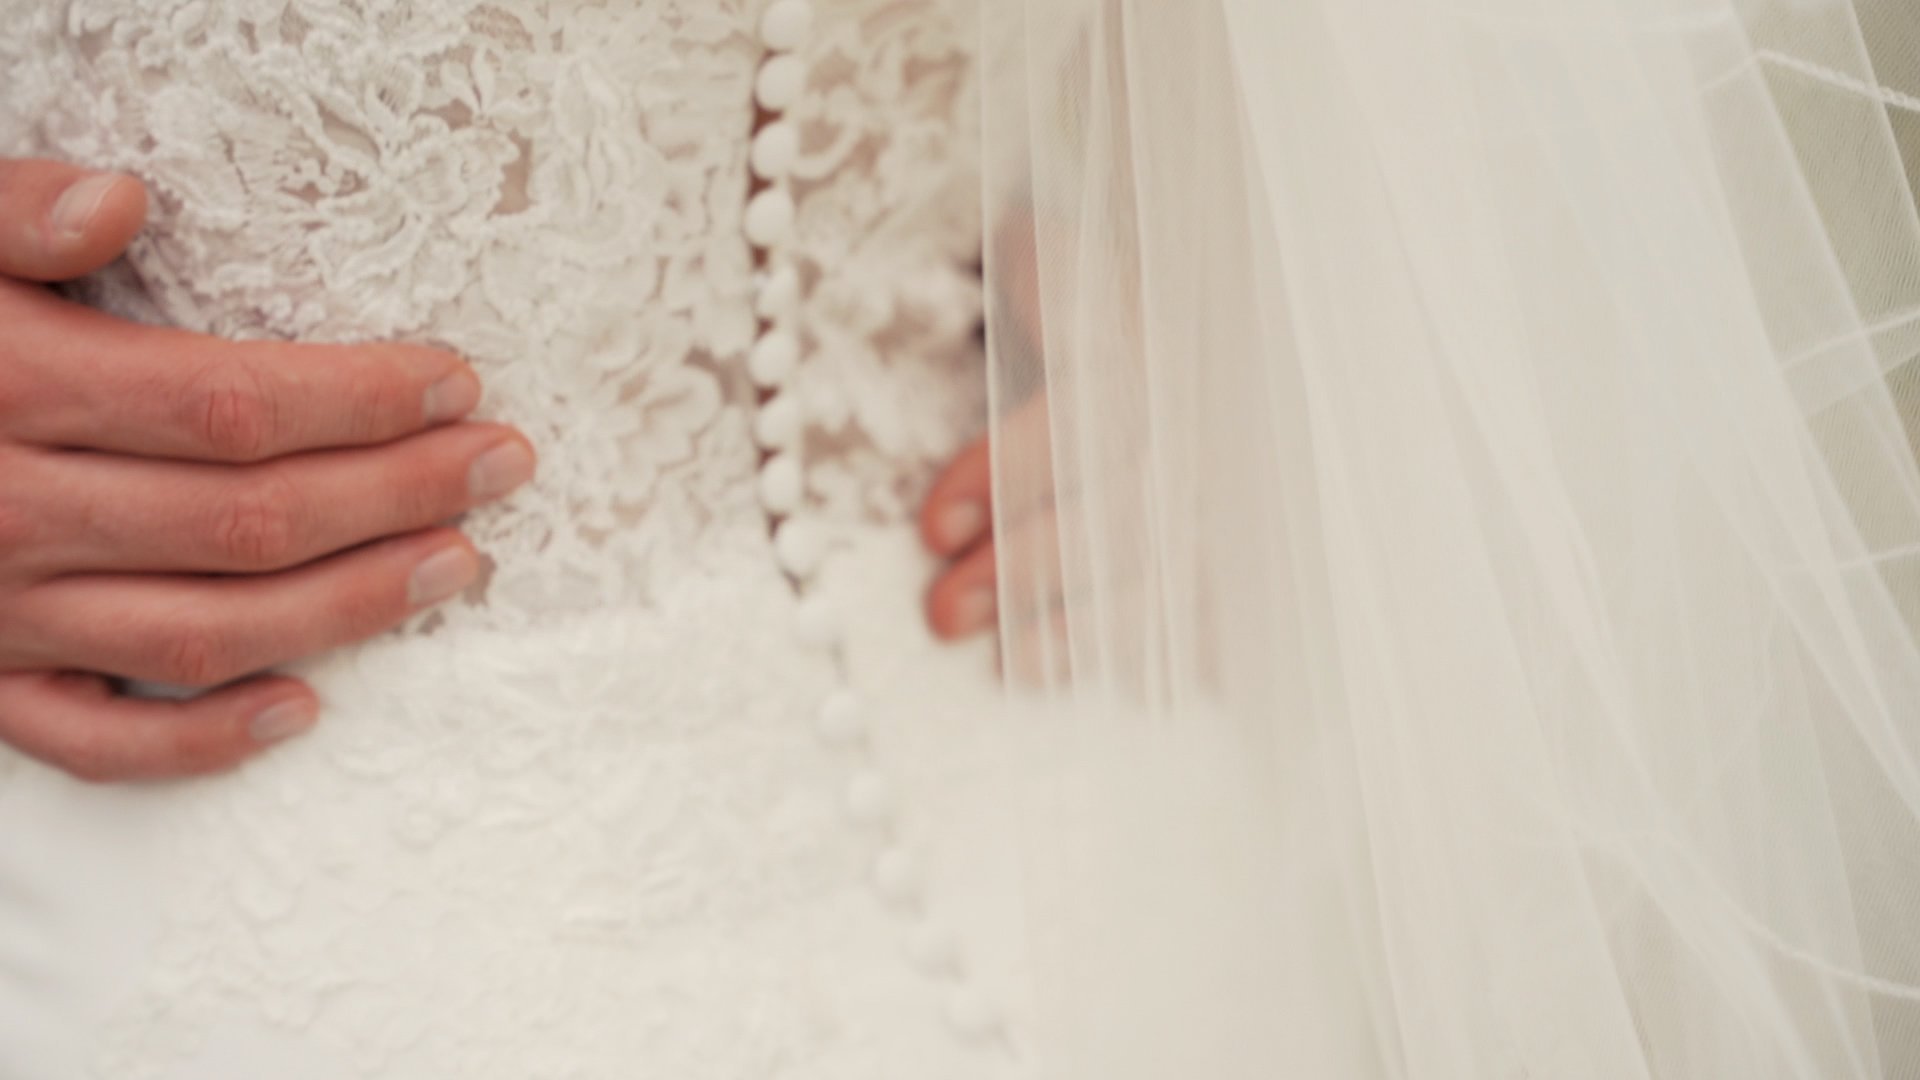 Beautiful up close photography of an intricate lace pattern and buttons on back of white wedding dress